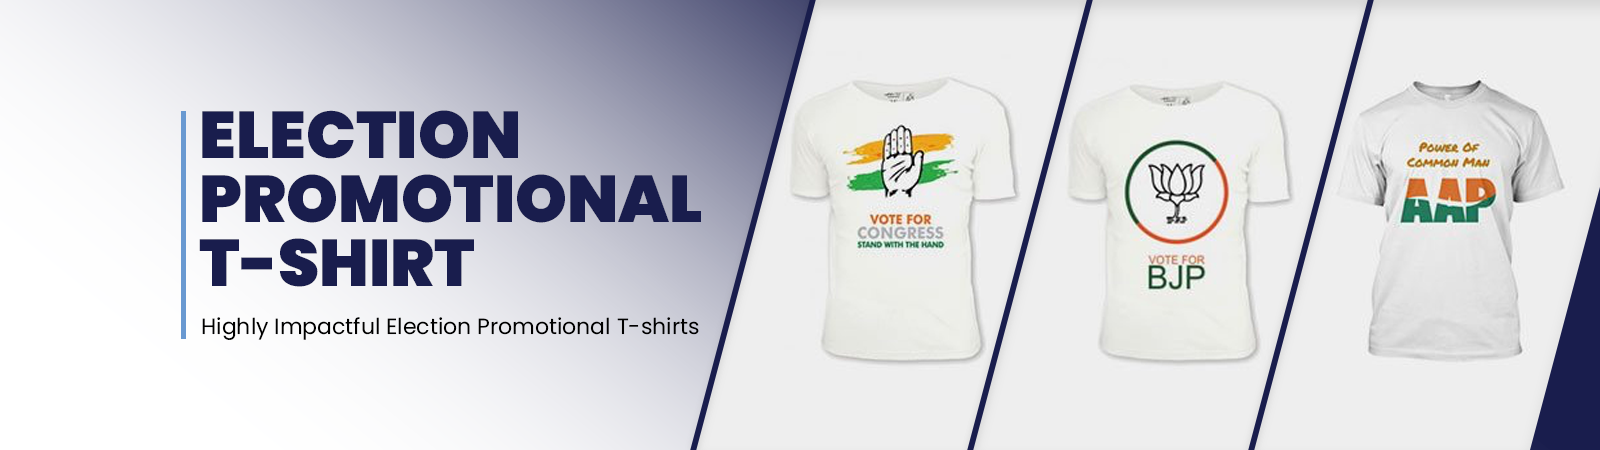 NCP Election T-Shirt